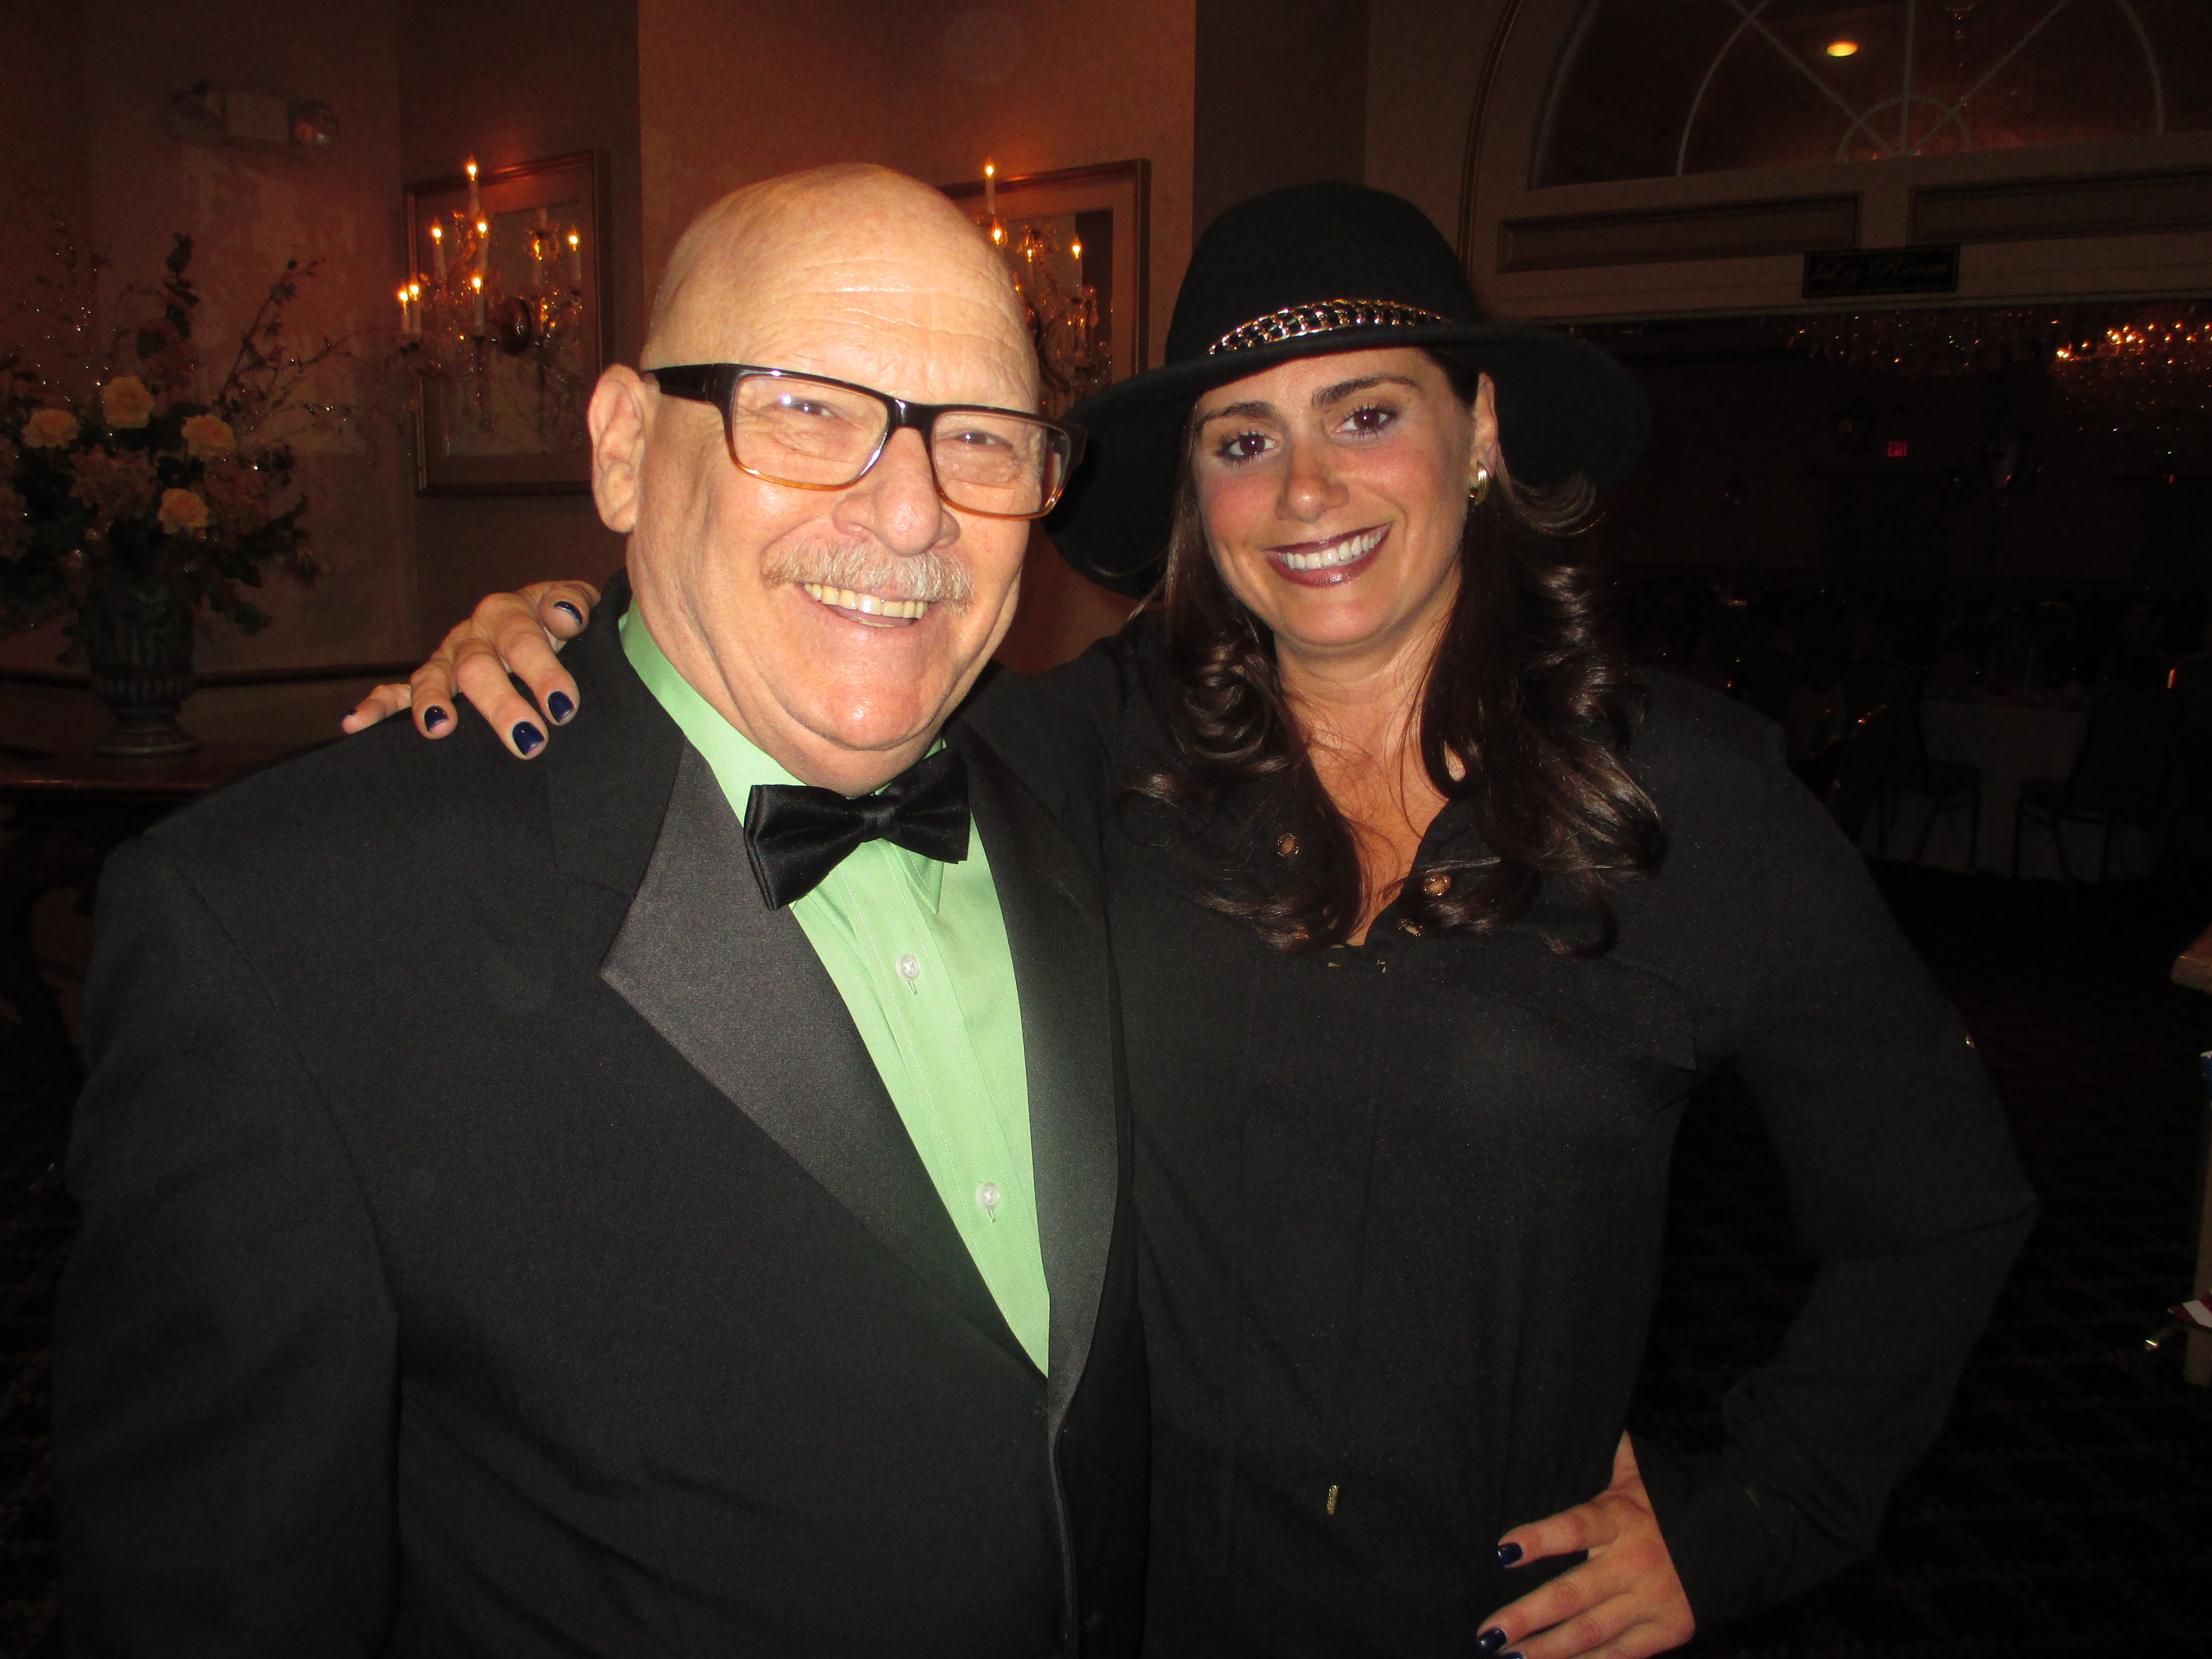 Charity Singing Performance at The New La Neve's Banquets ﻿276 Belmont Ave, Haledon, NJ., for 9/11 (2015) Benefit Show. [Pictured with Owner-Manager Yolanda Rose]